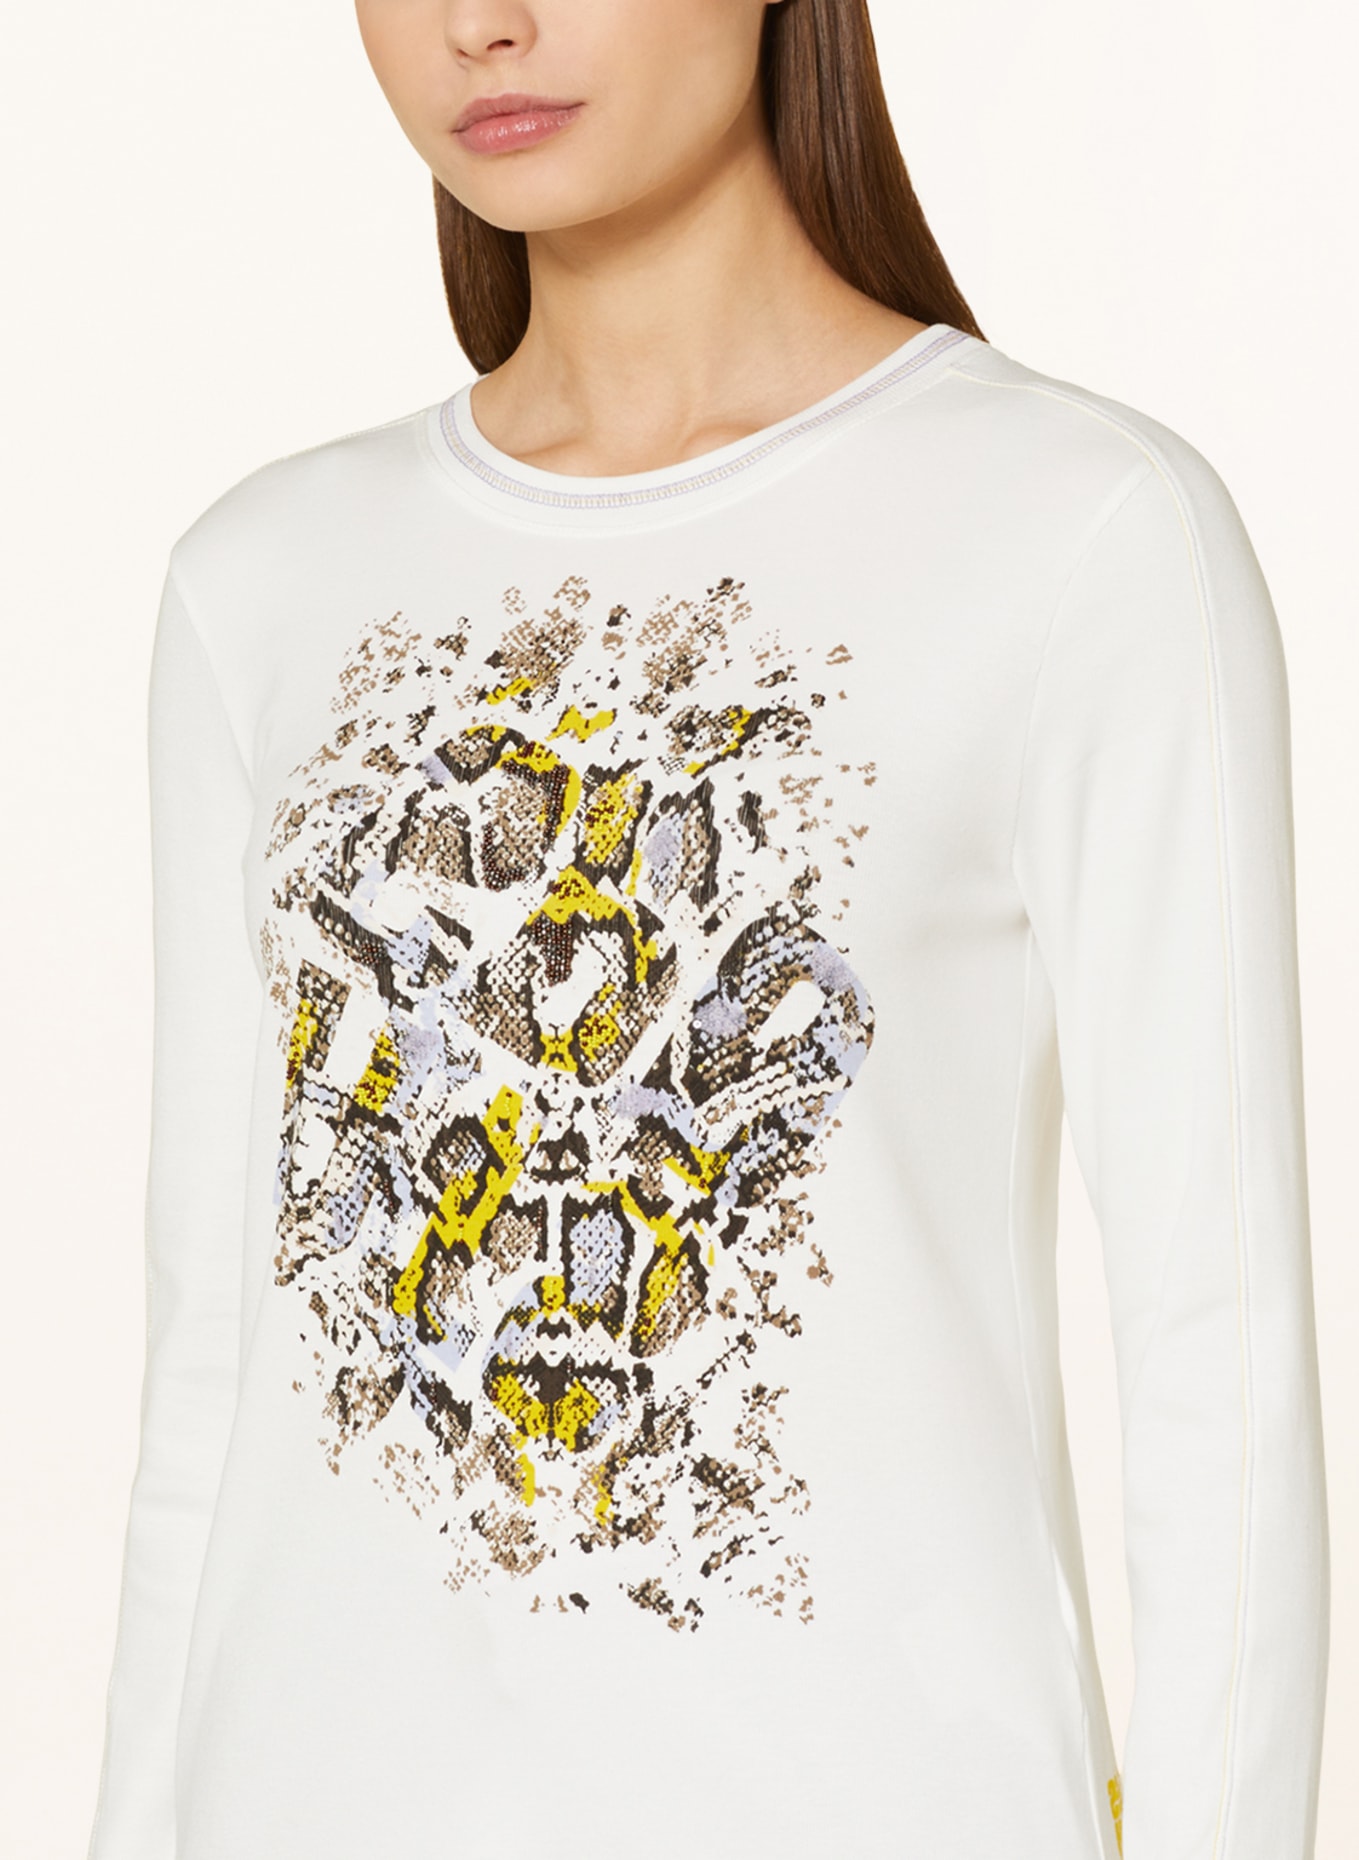 MARC CAIN Long sleeve shirt with decorative beads and sequins, Color: 110 off (Image 4)